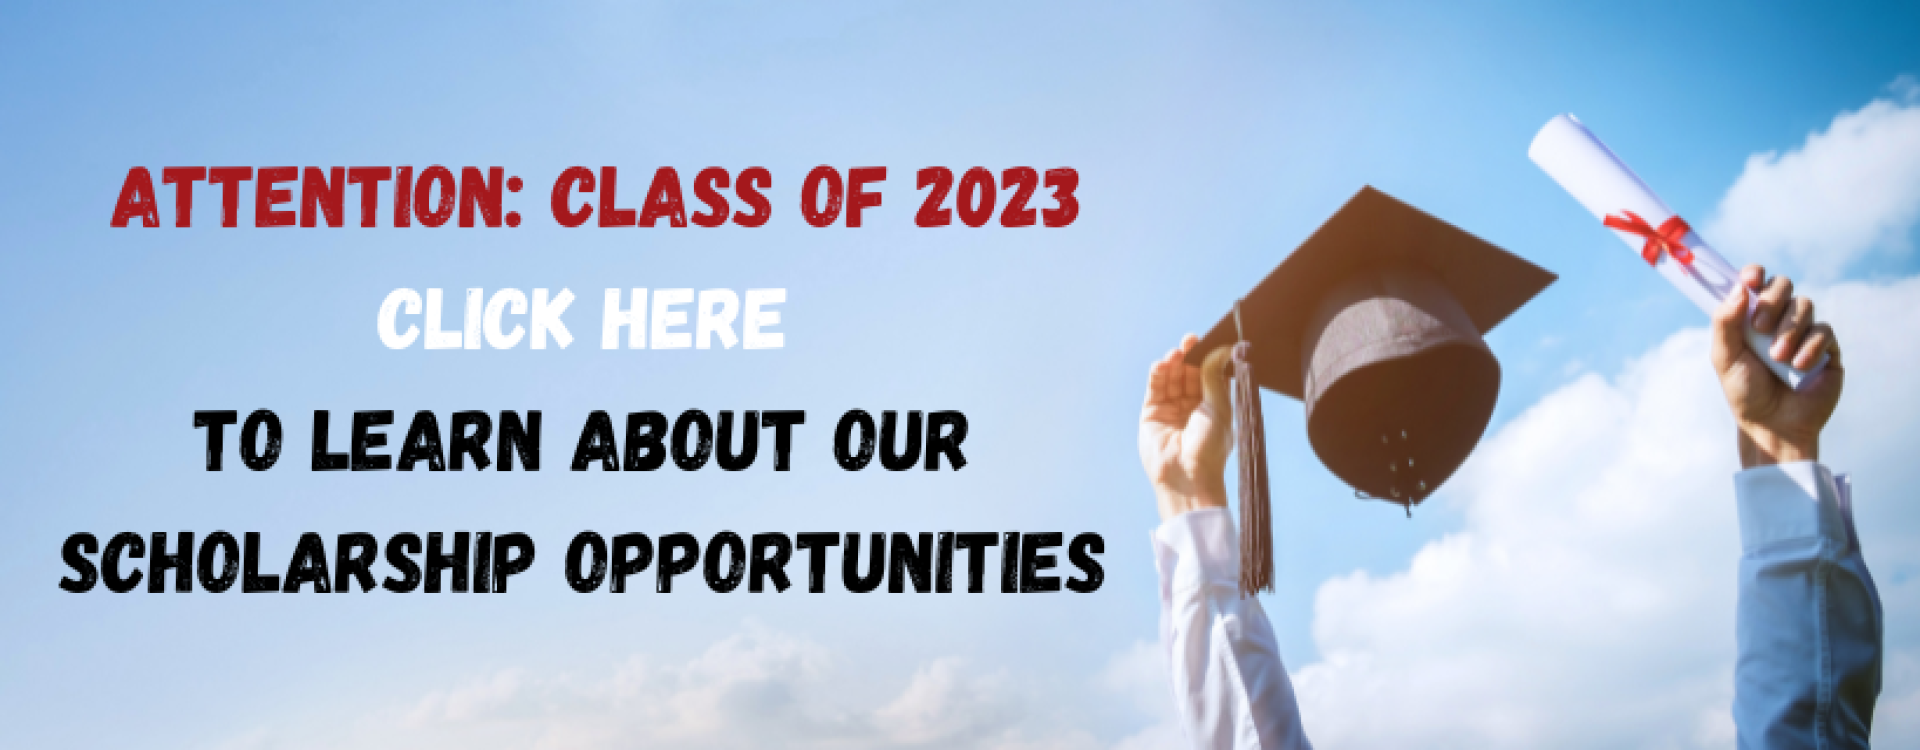 Attention Class of 2023 - Click here for Scholarship information!